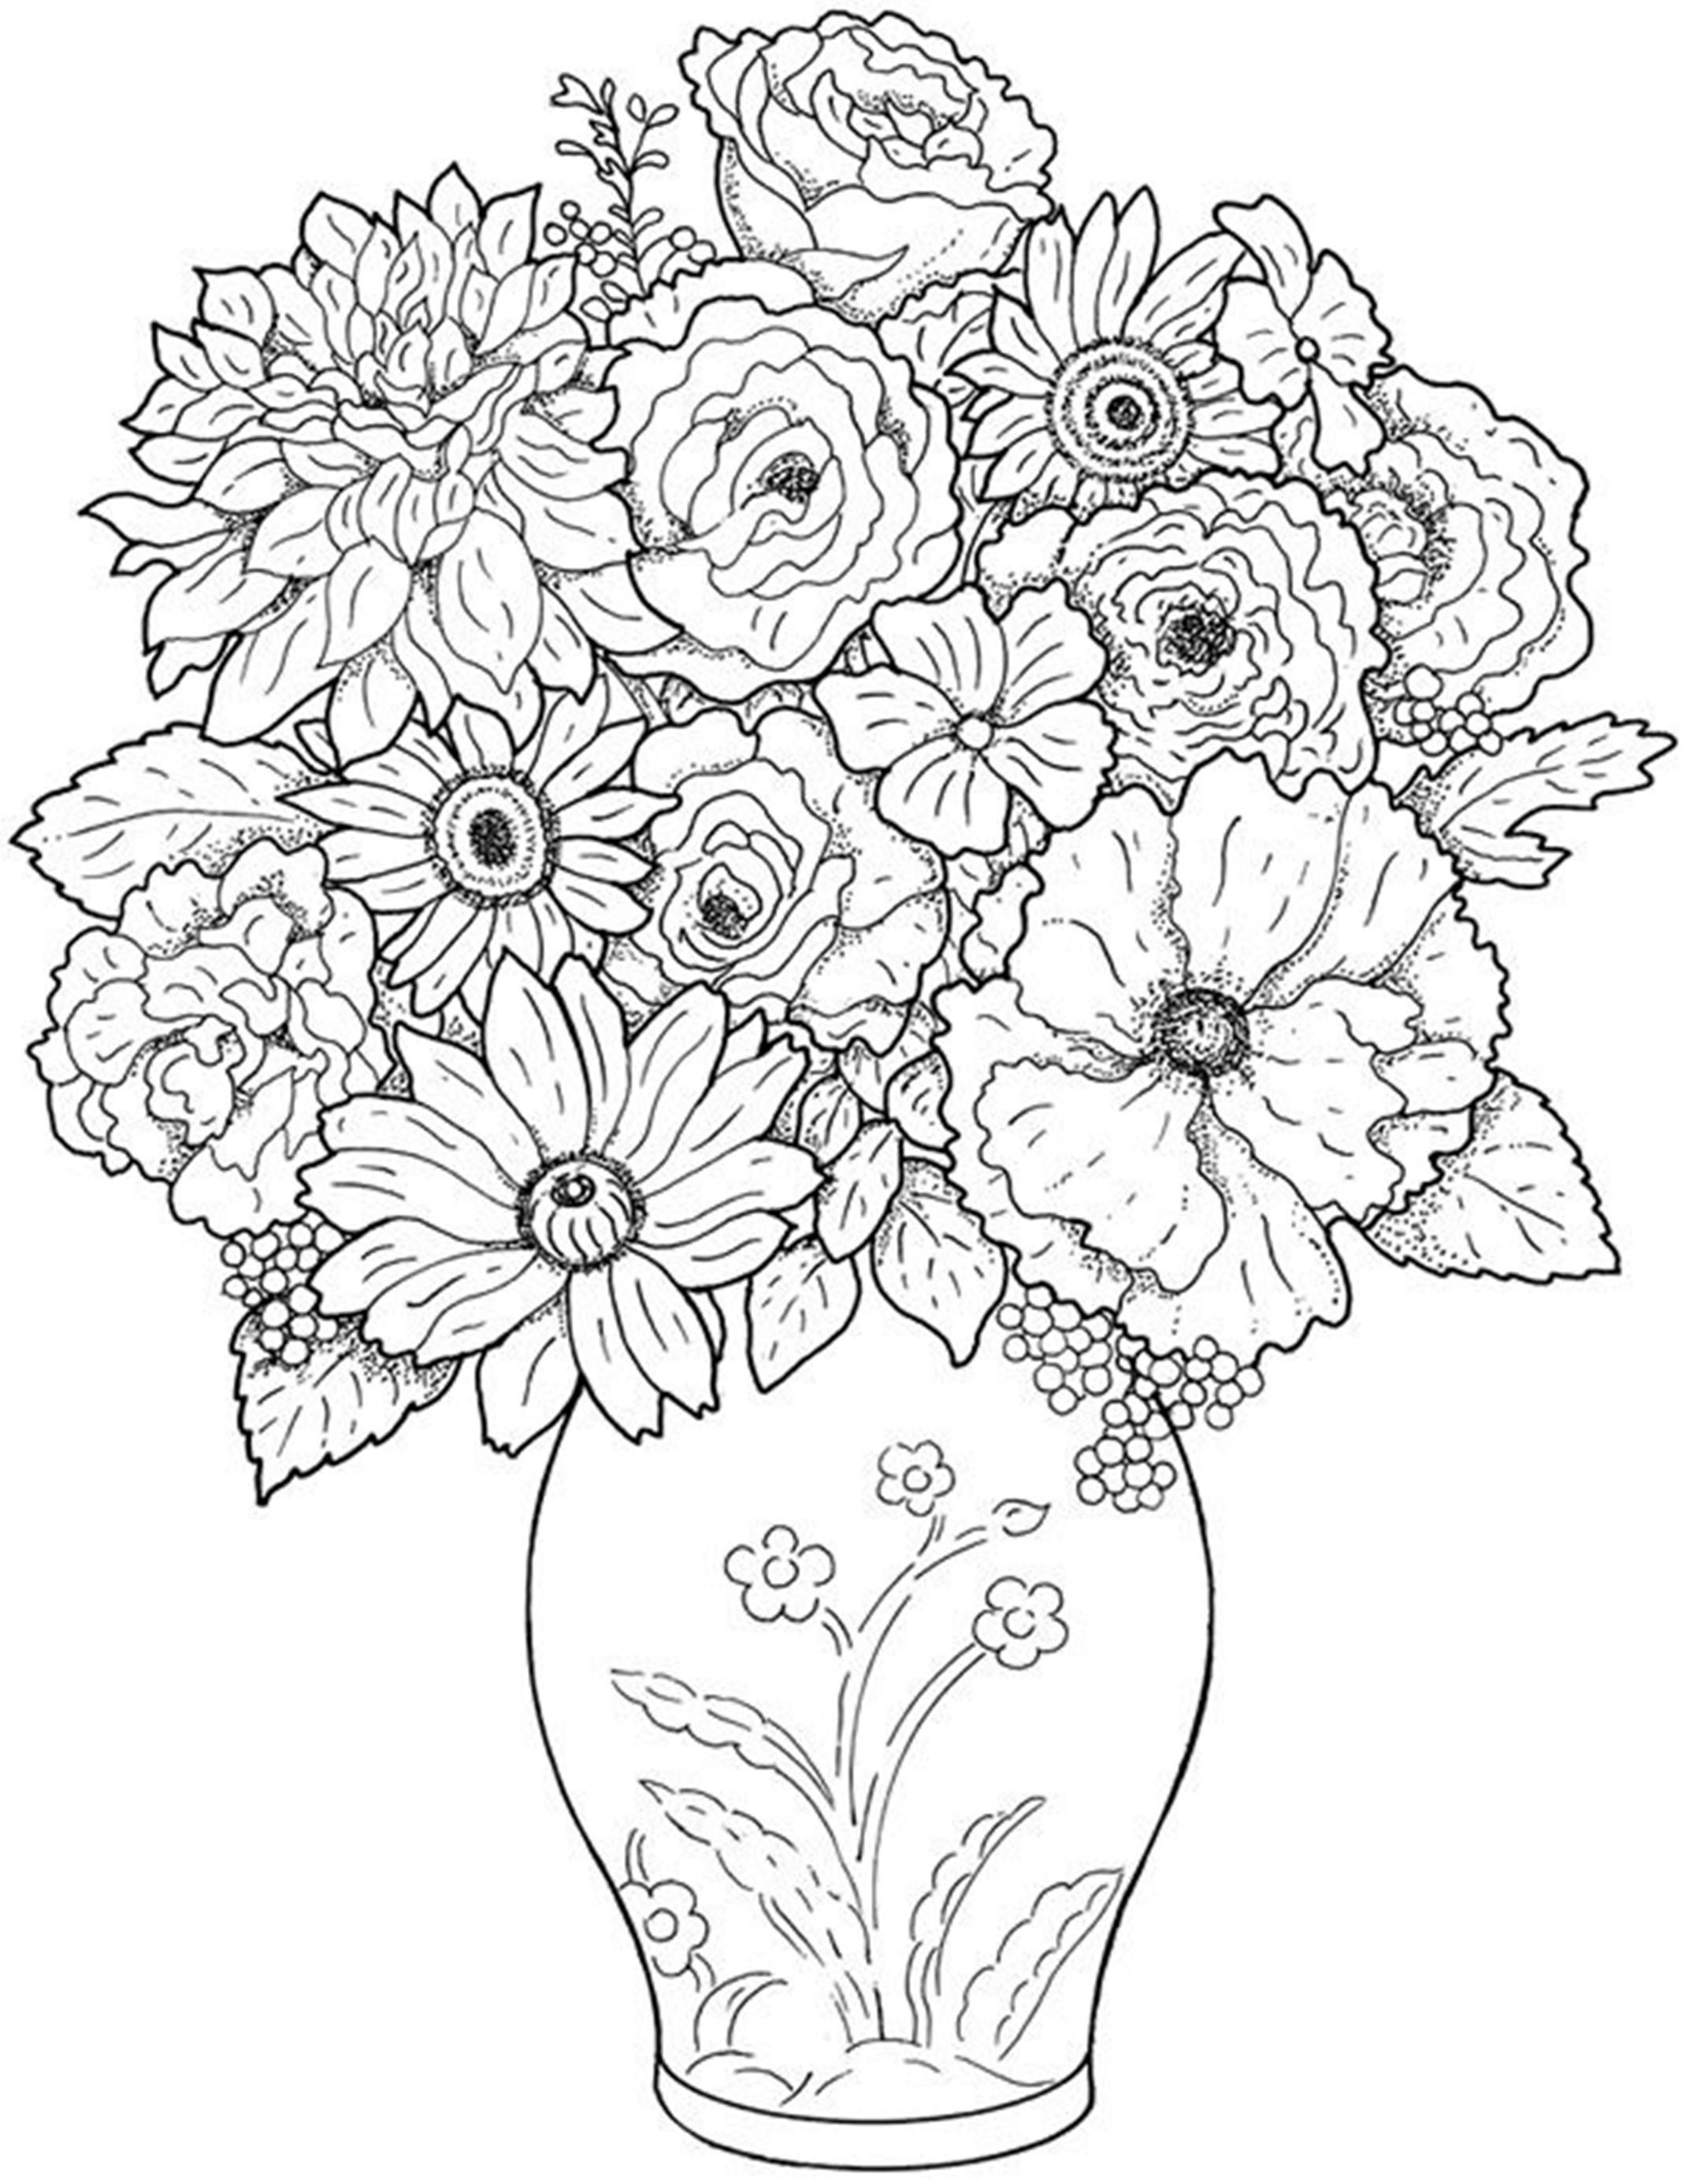 Bouquet Of Dahlia In Vase Coloring Page